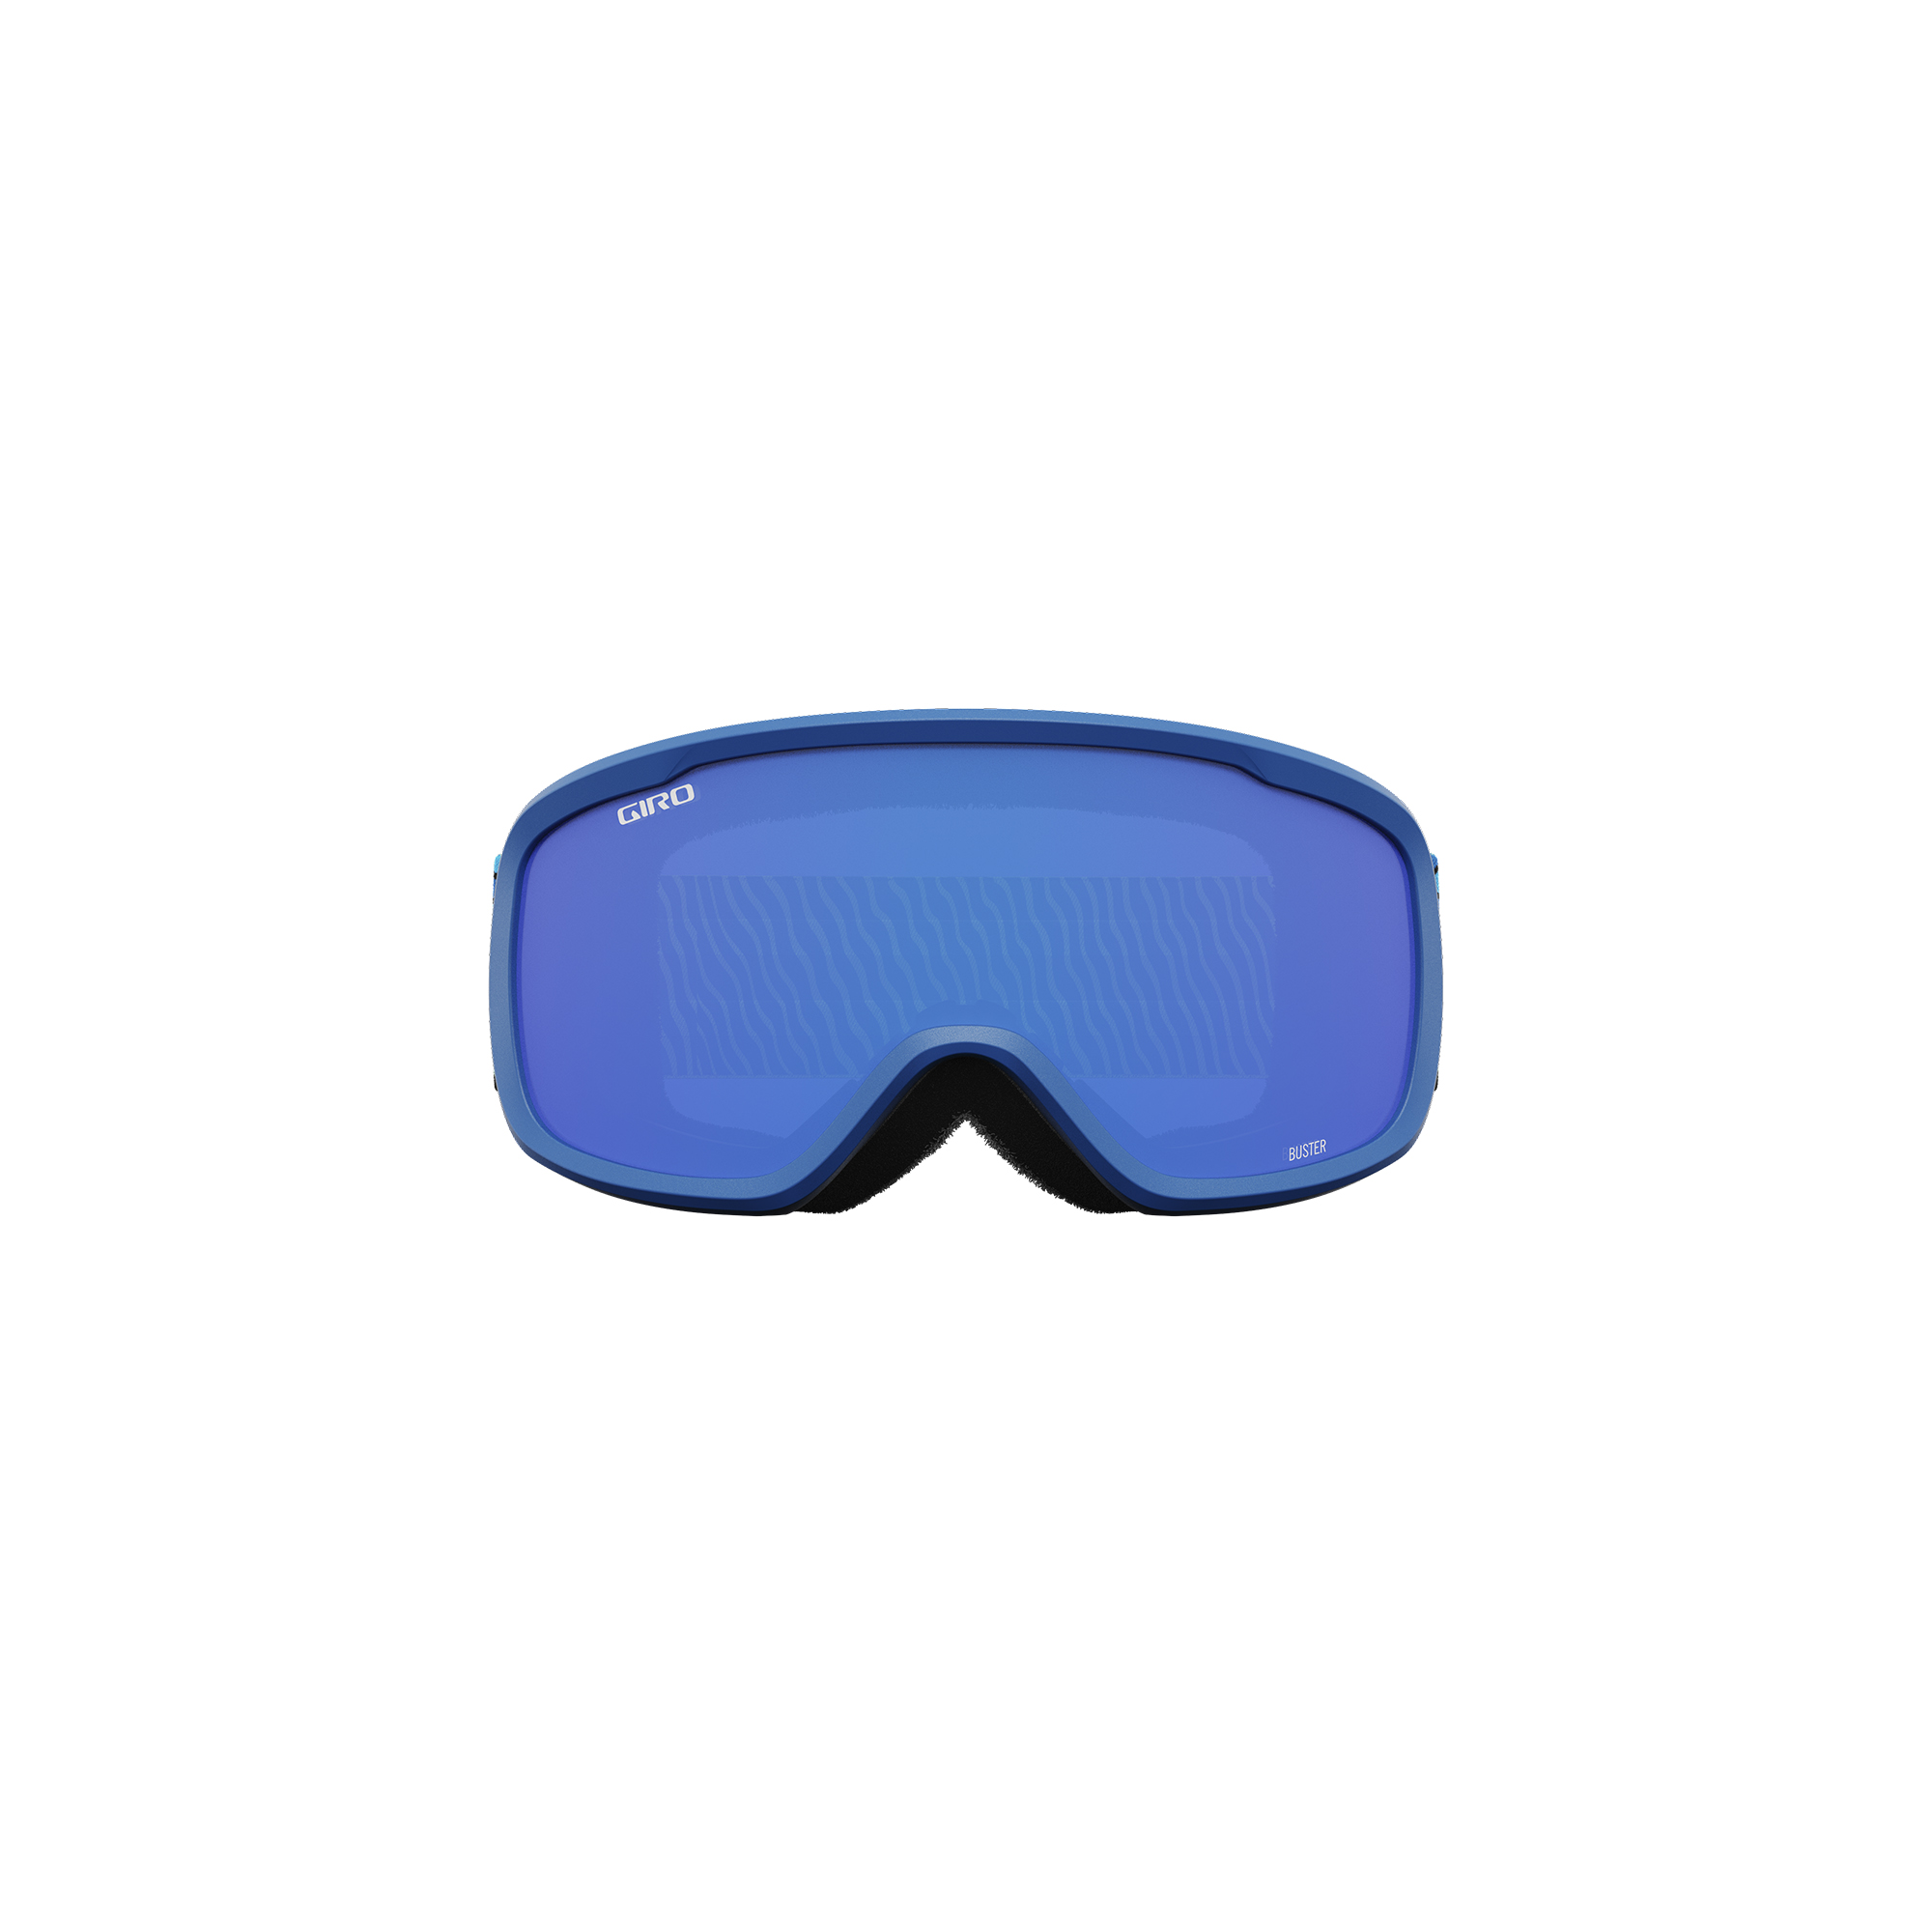 https://cdn11.bigcommerce.com/s-41ktle6mqu/images/stencil/original/products/173855/168424/giro-buster-goggle-blue-shreddy-yeti-grey-cobalt-front__61413.1657923600.jpg